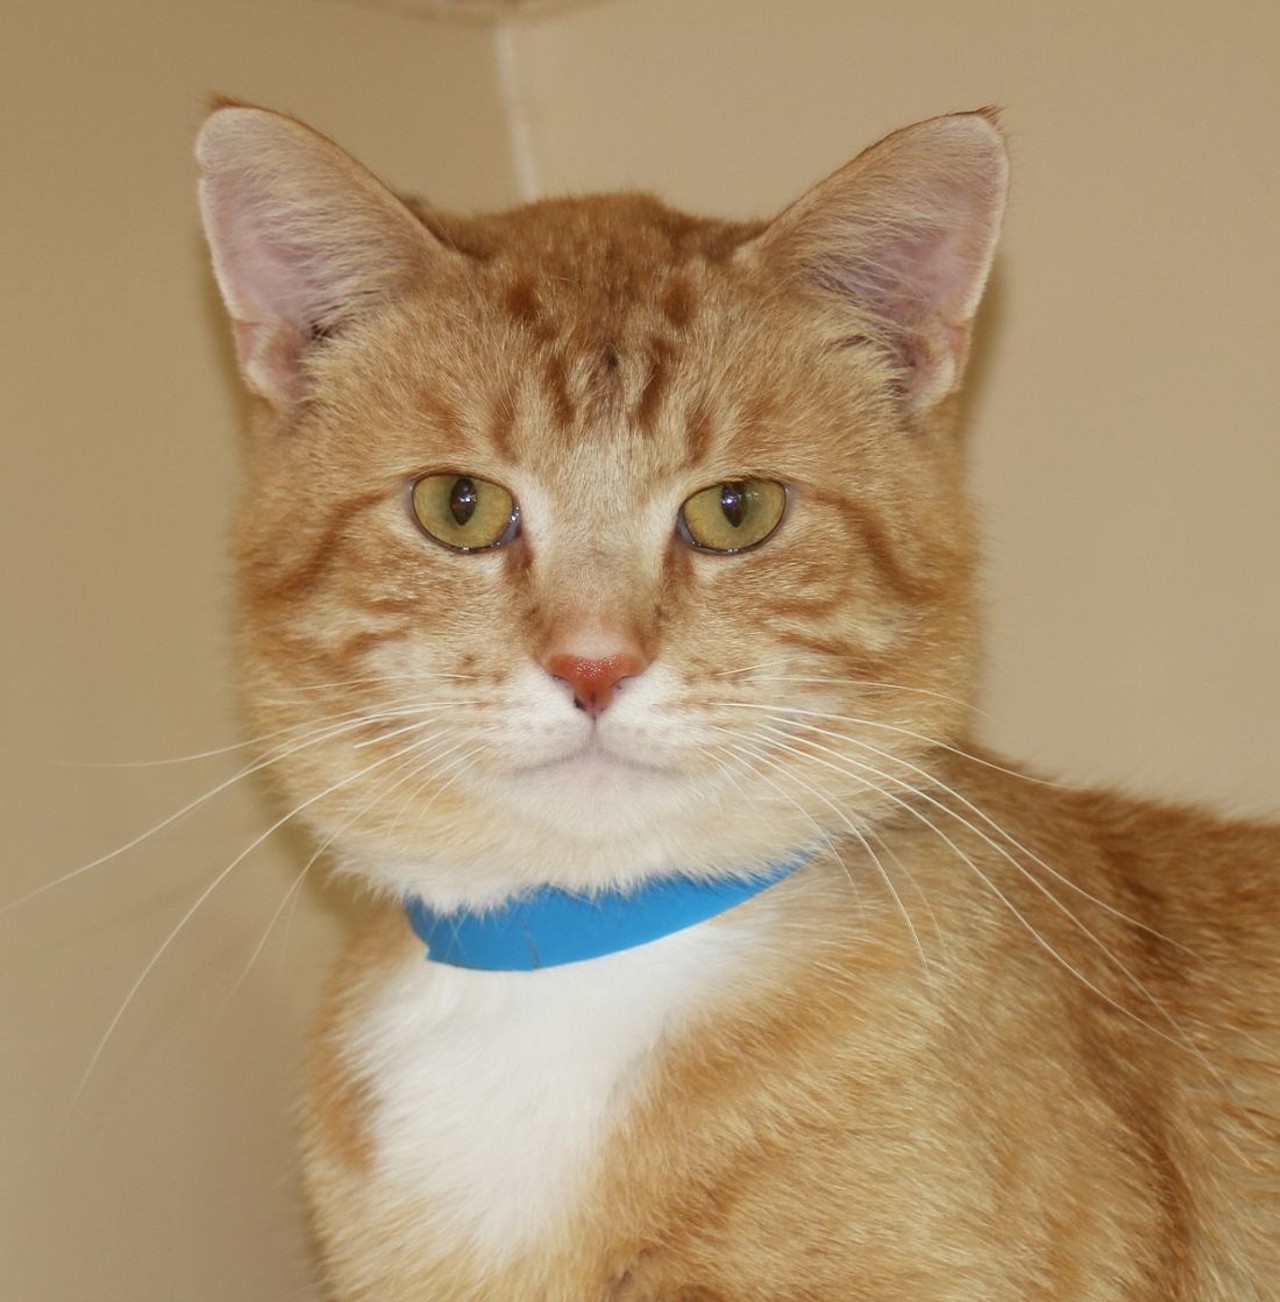 NAME: Waffle
GENDER: Male
BREED: Domestic Short Hair
AGE: 2 years, 2 months
WEIGHT: 13 pounds
SPECIAL CONSIDERATIONS: Waffle prefers a home with other cats and older or no children
REASON I CAME TO MHS: Rescued in Detroit
LOCATION: Mackey Center for Animal Care in Westland
ID NUMBER: 865610